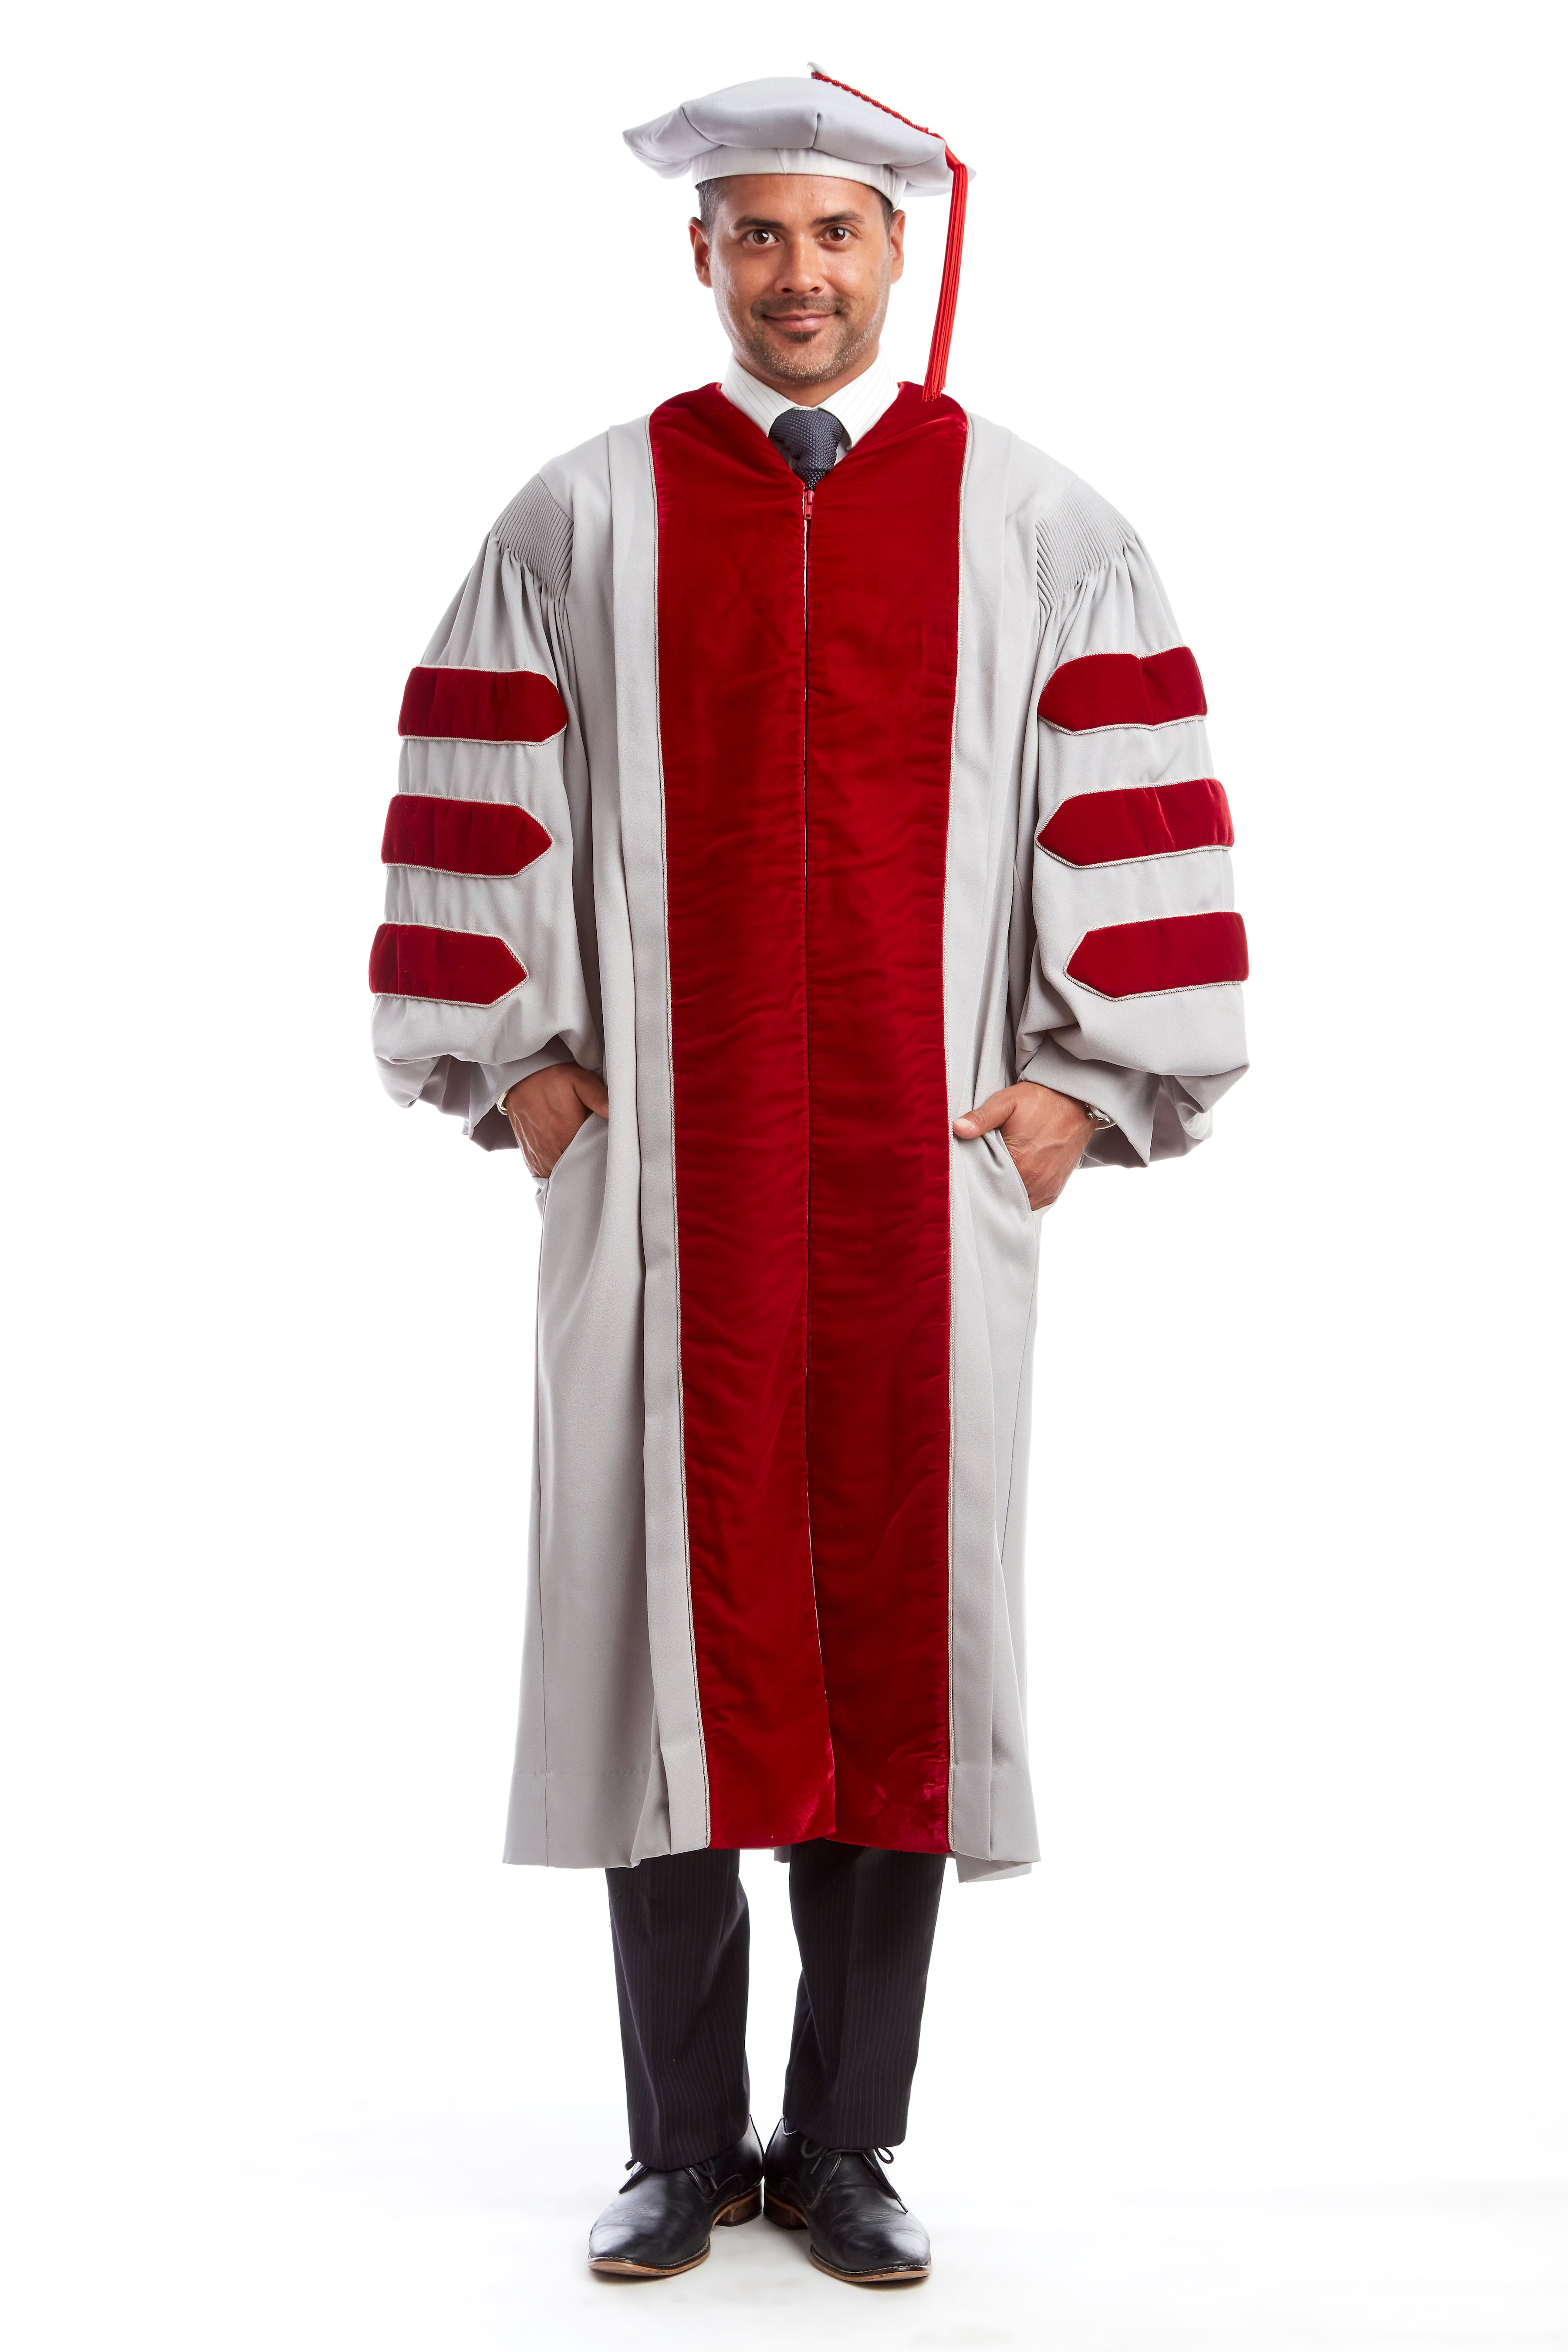 MIT Doctoral Regalia Set. Premium Grey and Cardinal Red Gown with Eight-Sided Cap/Tam including Red Tassel